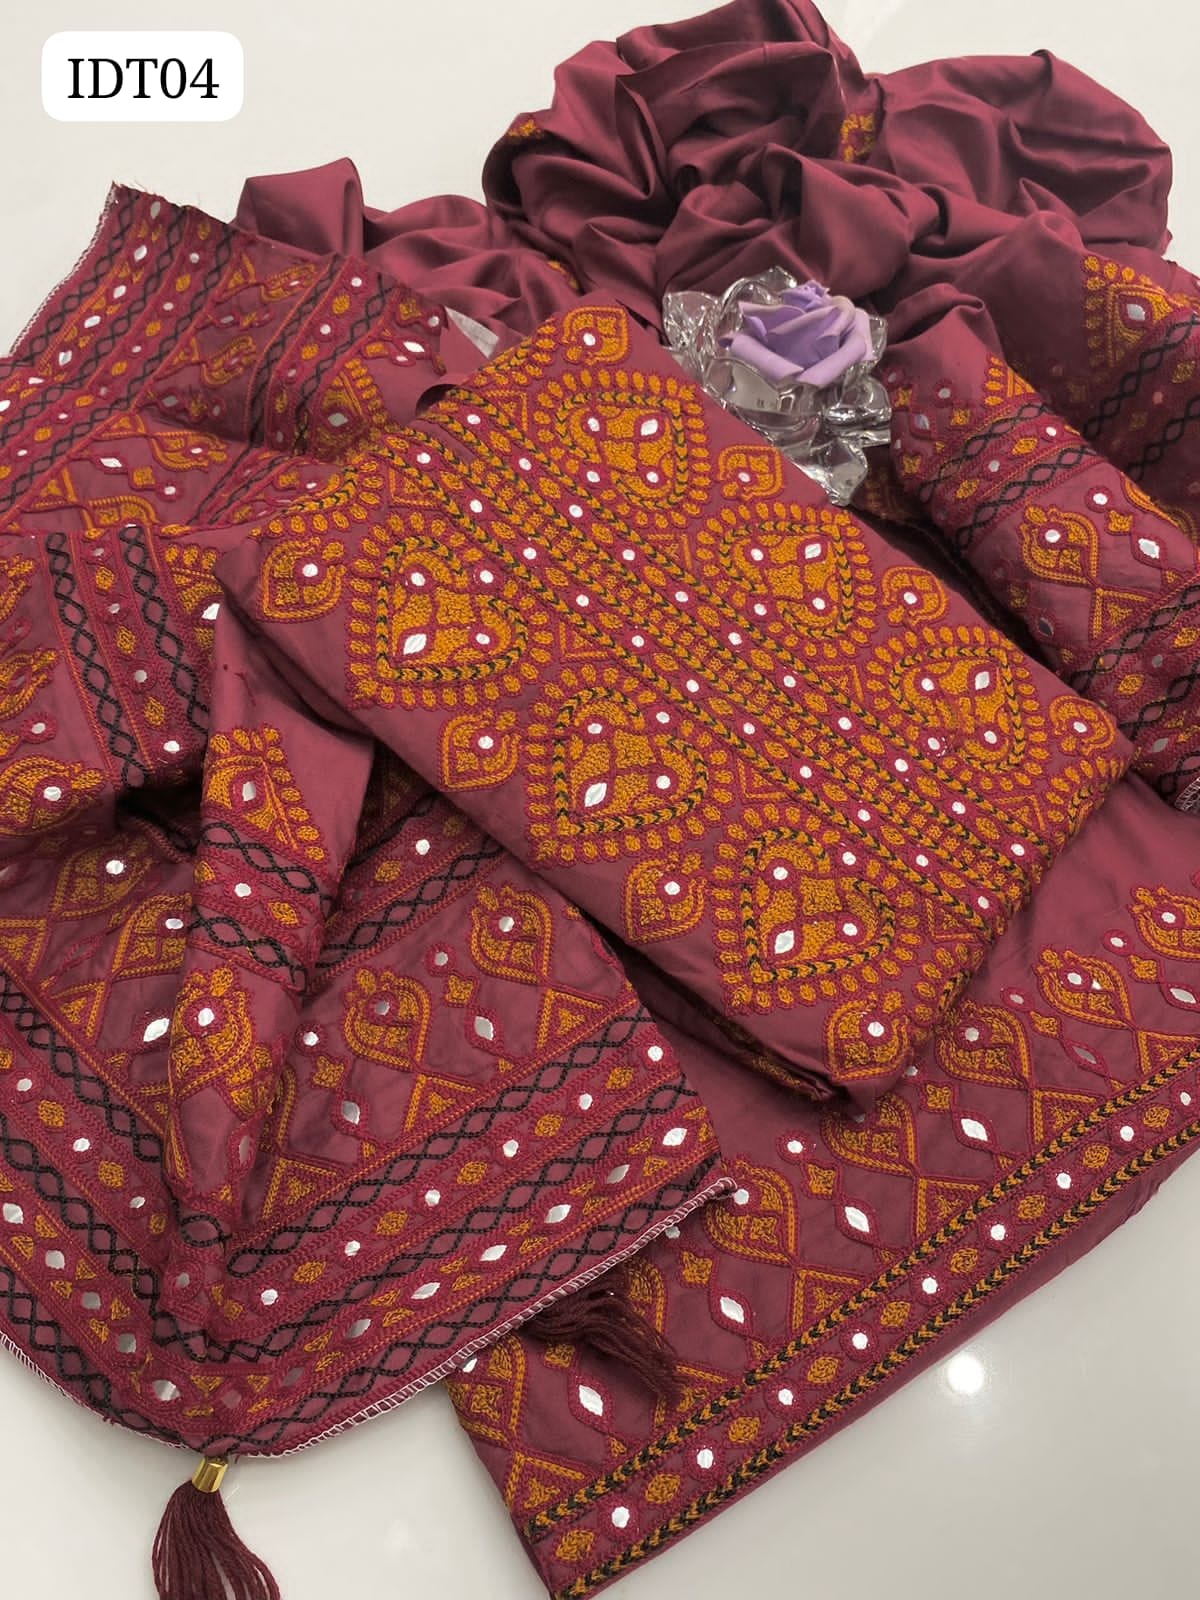 LINEN FABRIC AARI BALOCHI EMBROIDERY WORK SHIRT WITH ARRI EMBROIDERY ON LINEN TROUSER AND AARI PALLU EMBROIDERY ON LINEN DUPPATTA